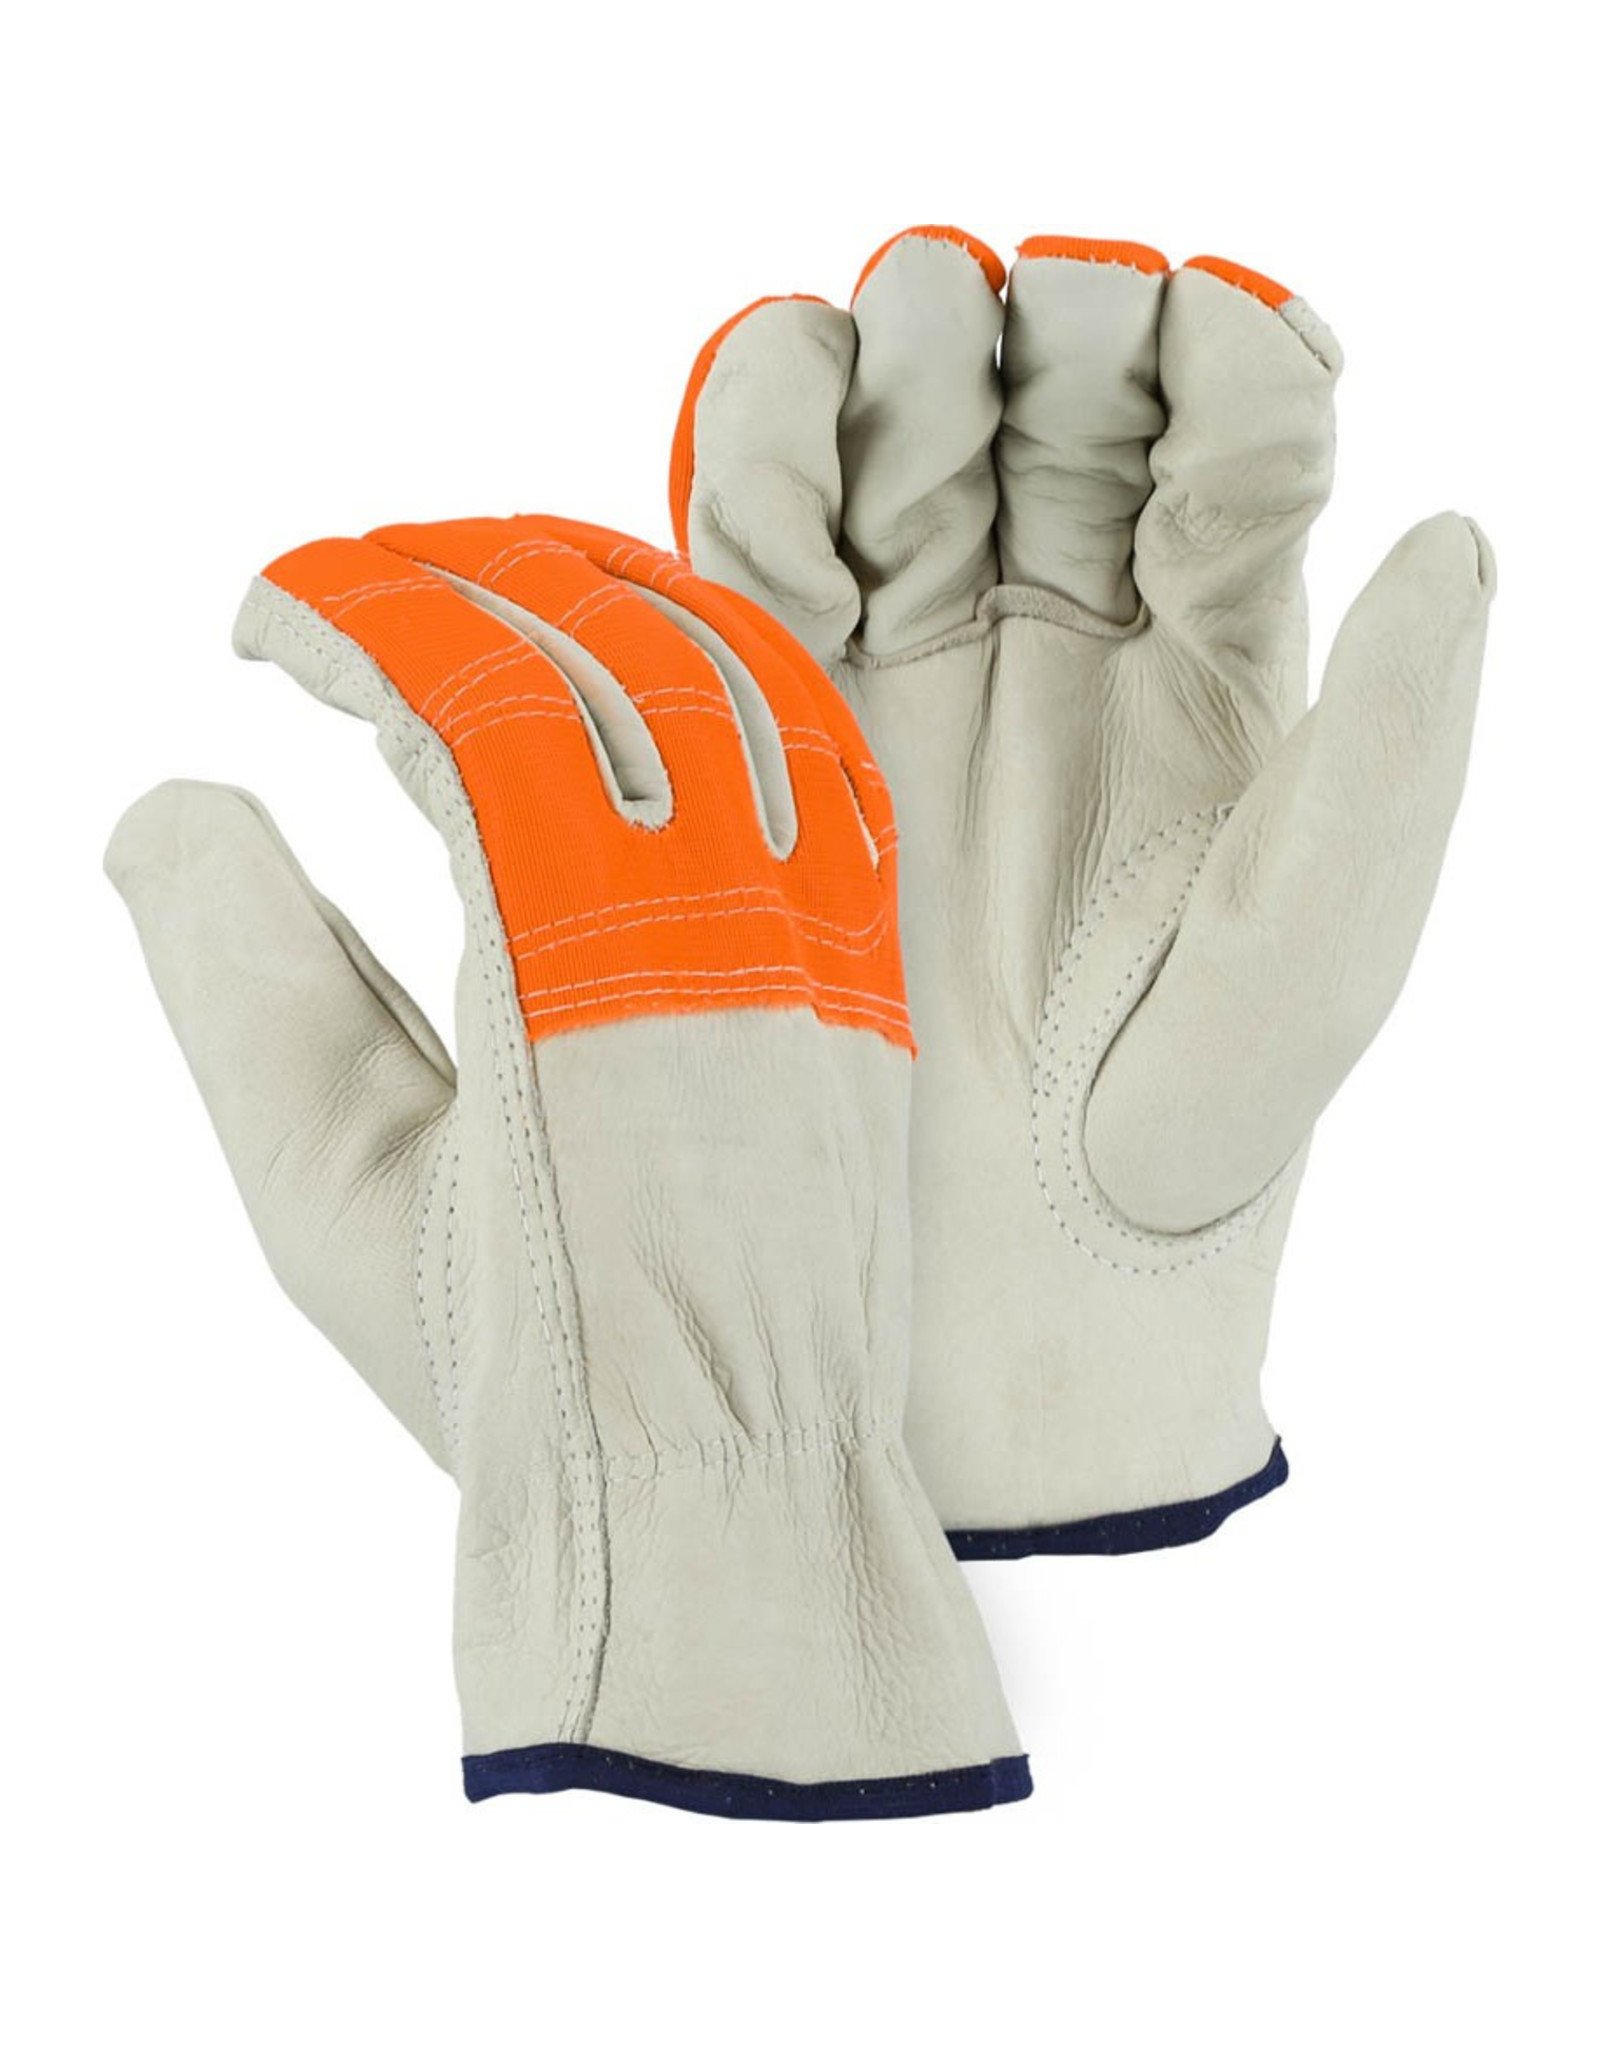 Majestic Glove Cowhide Drivers Glove With High Visibility Orange Cloth Fingers